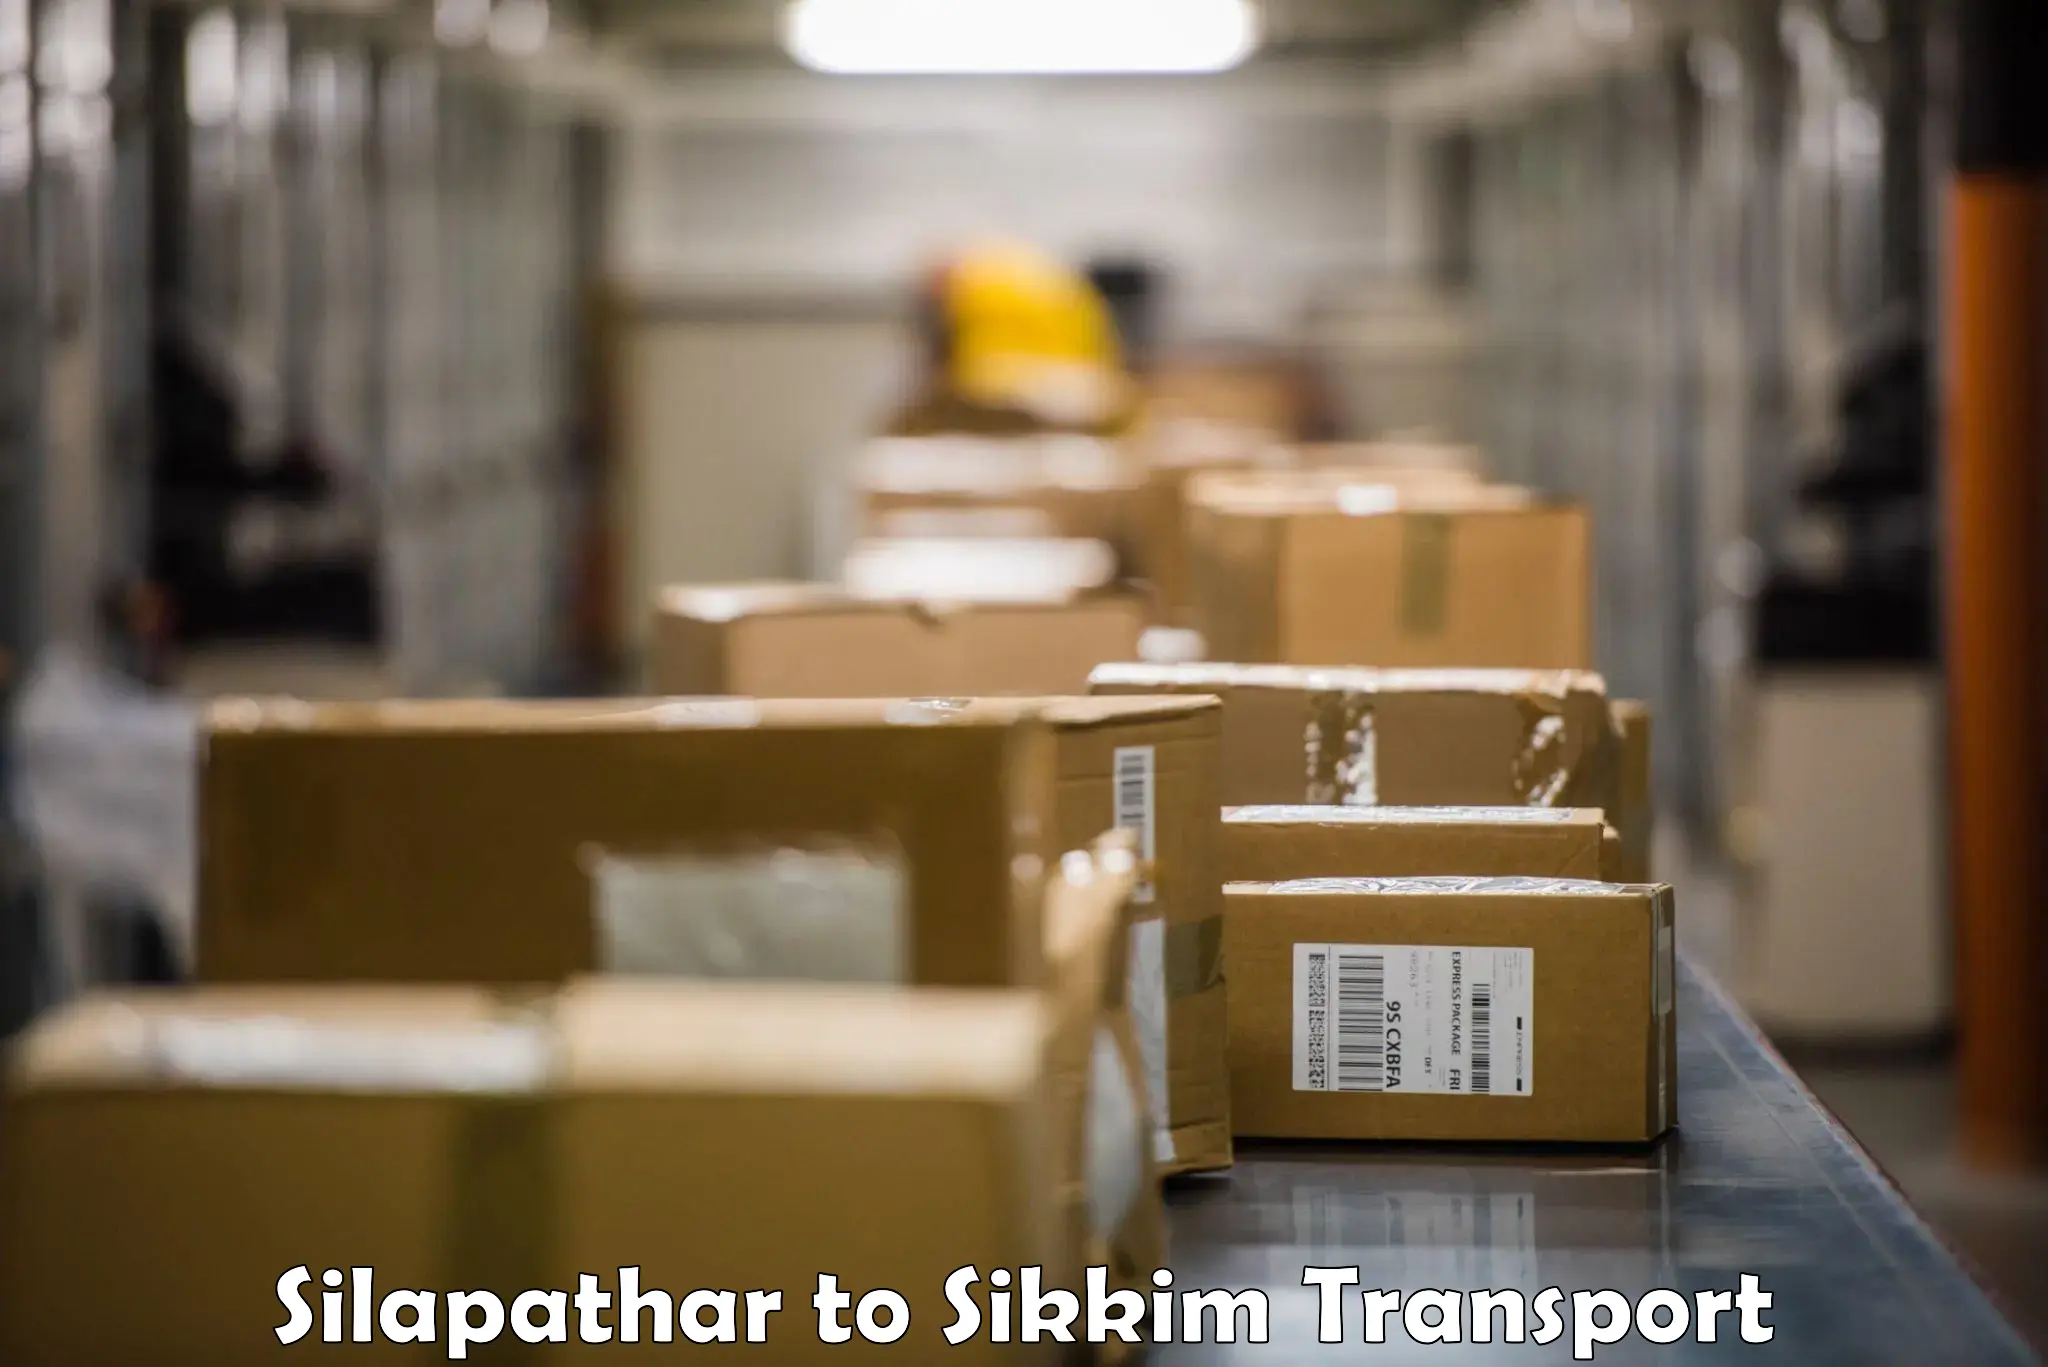 Online transport service Silapathar to Geyzing